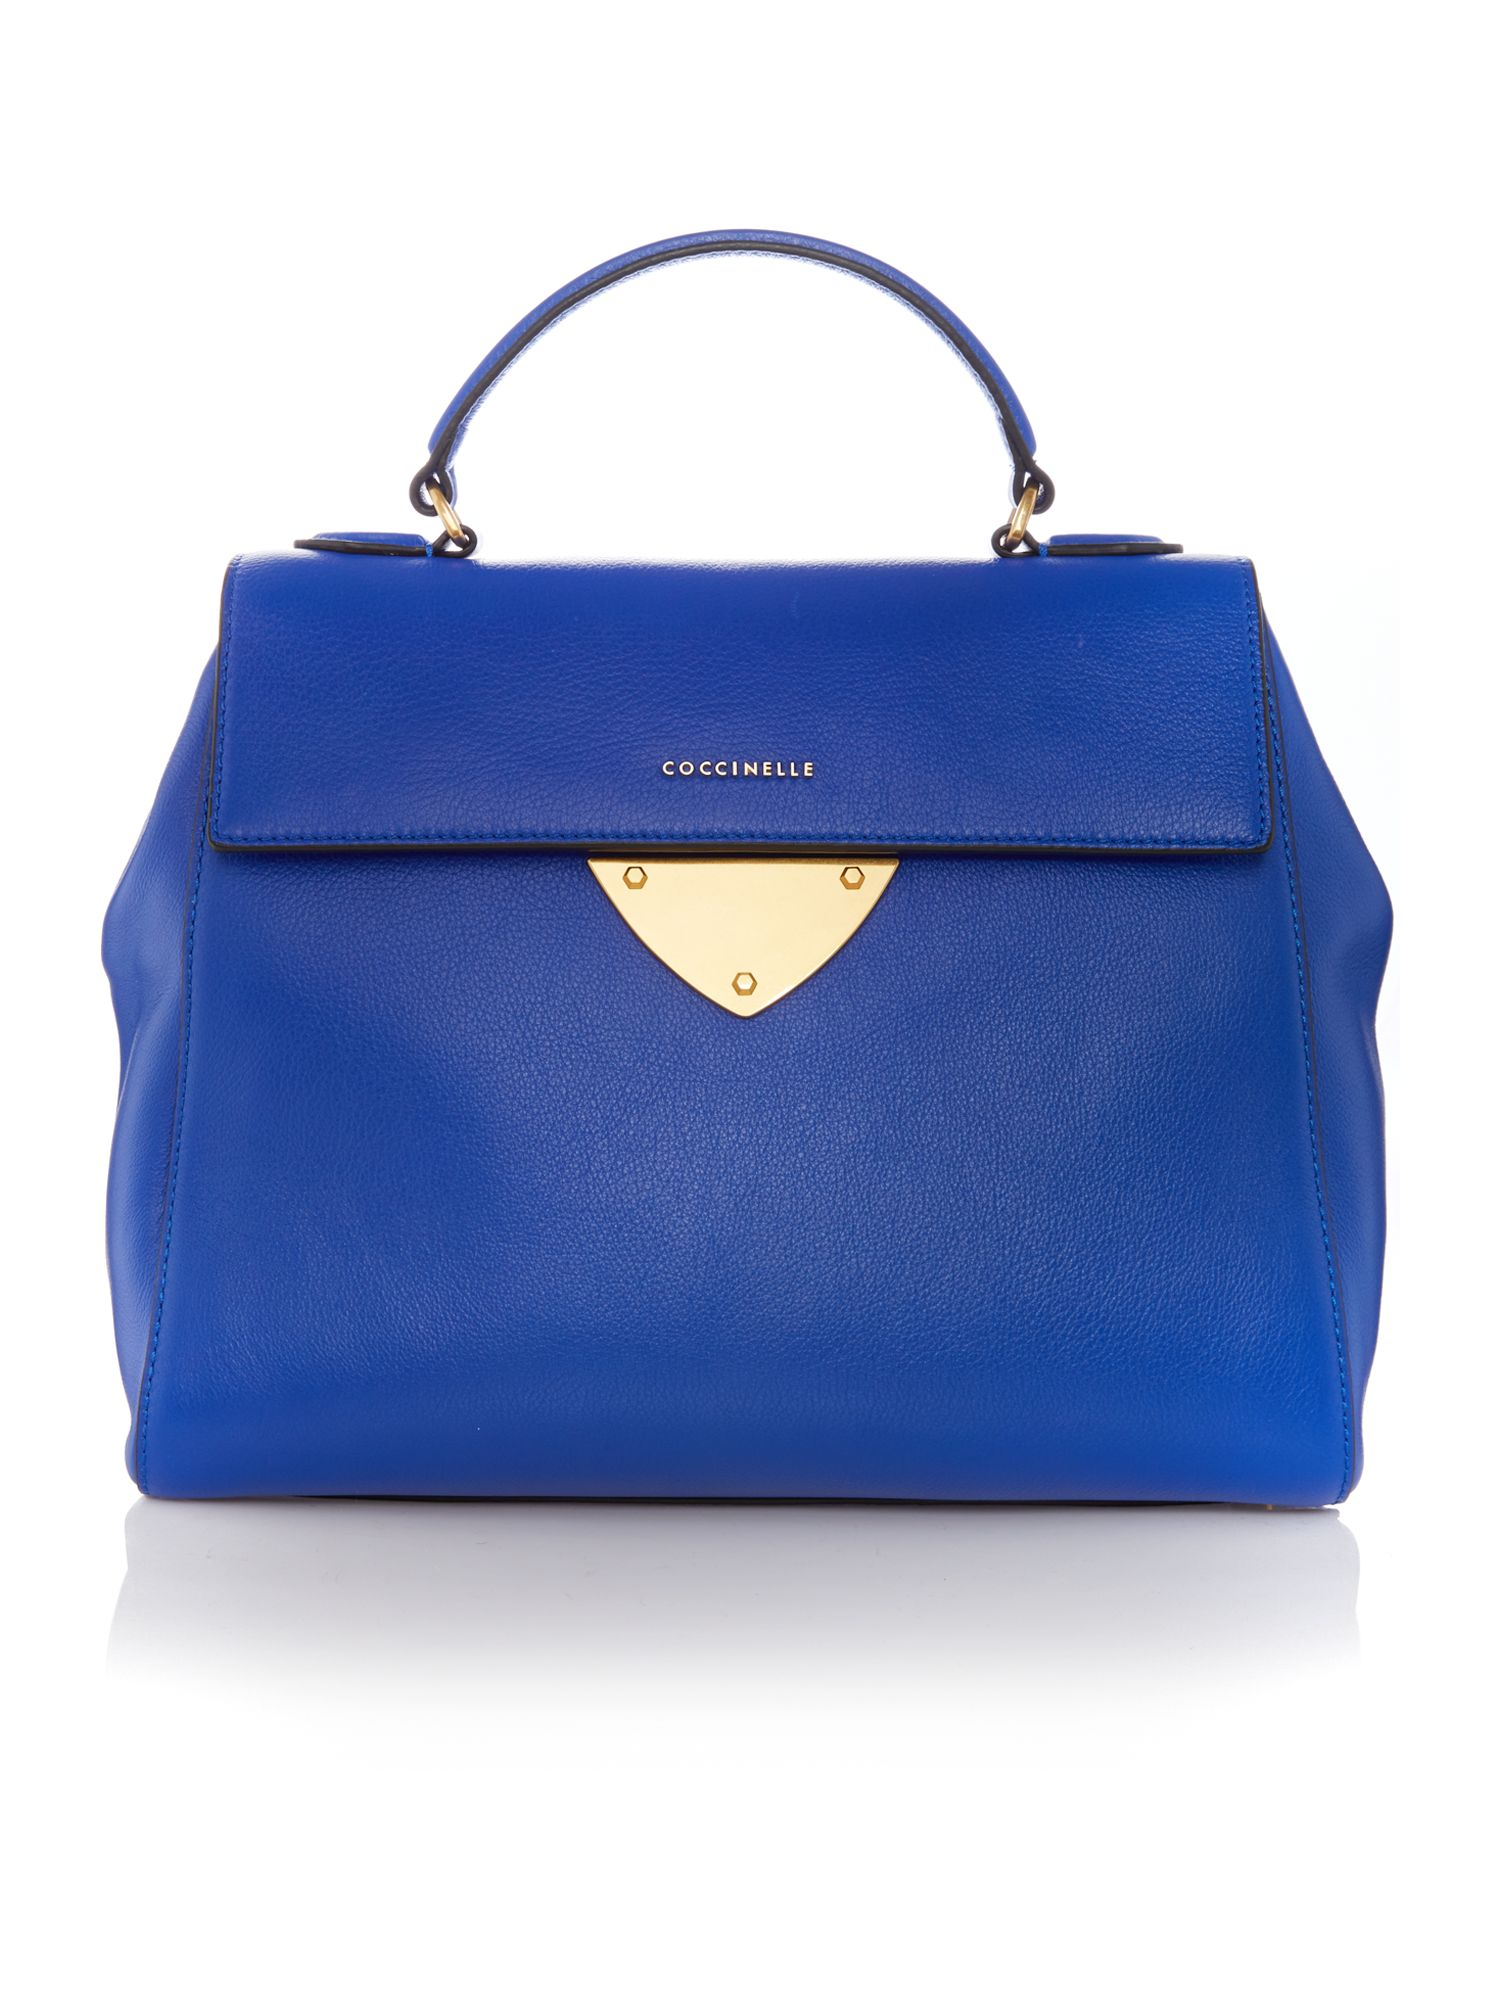 Coccinelle Blue Flap Over Satchel Bag in Blue | Lyst